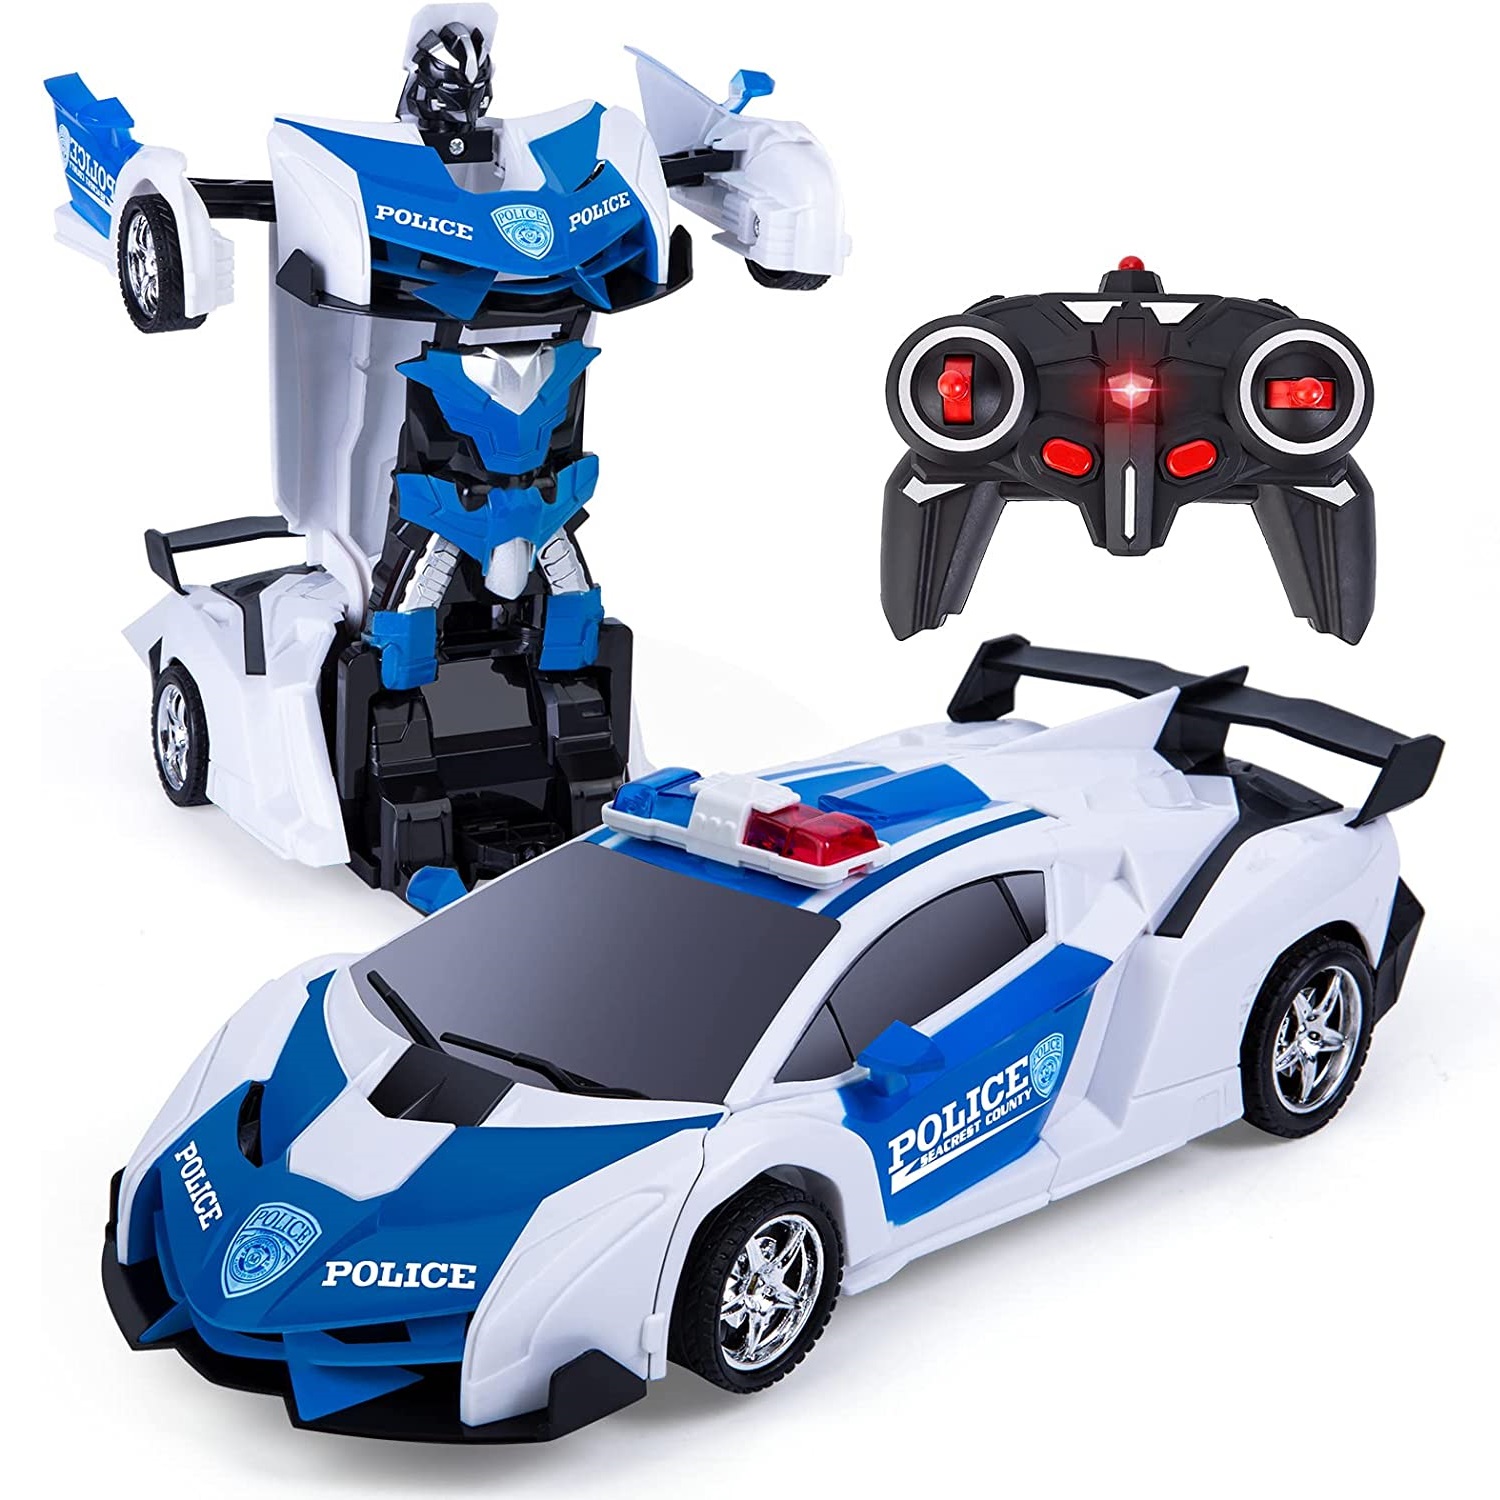 Police-Transformers-3